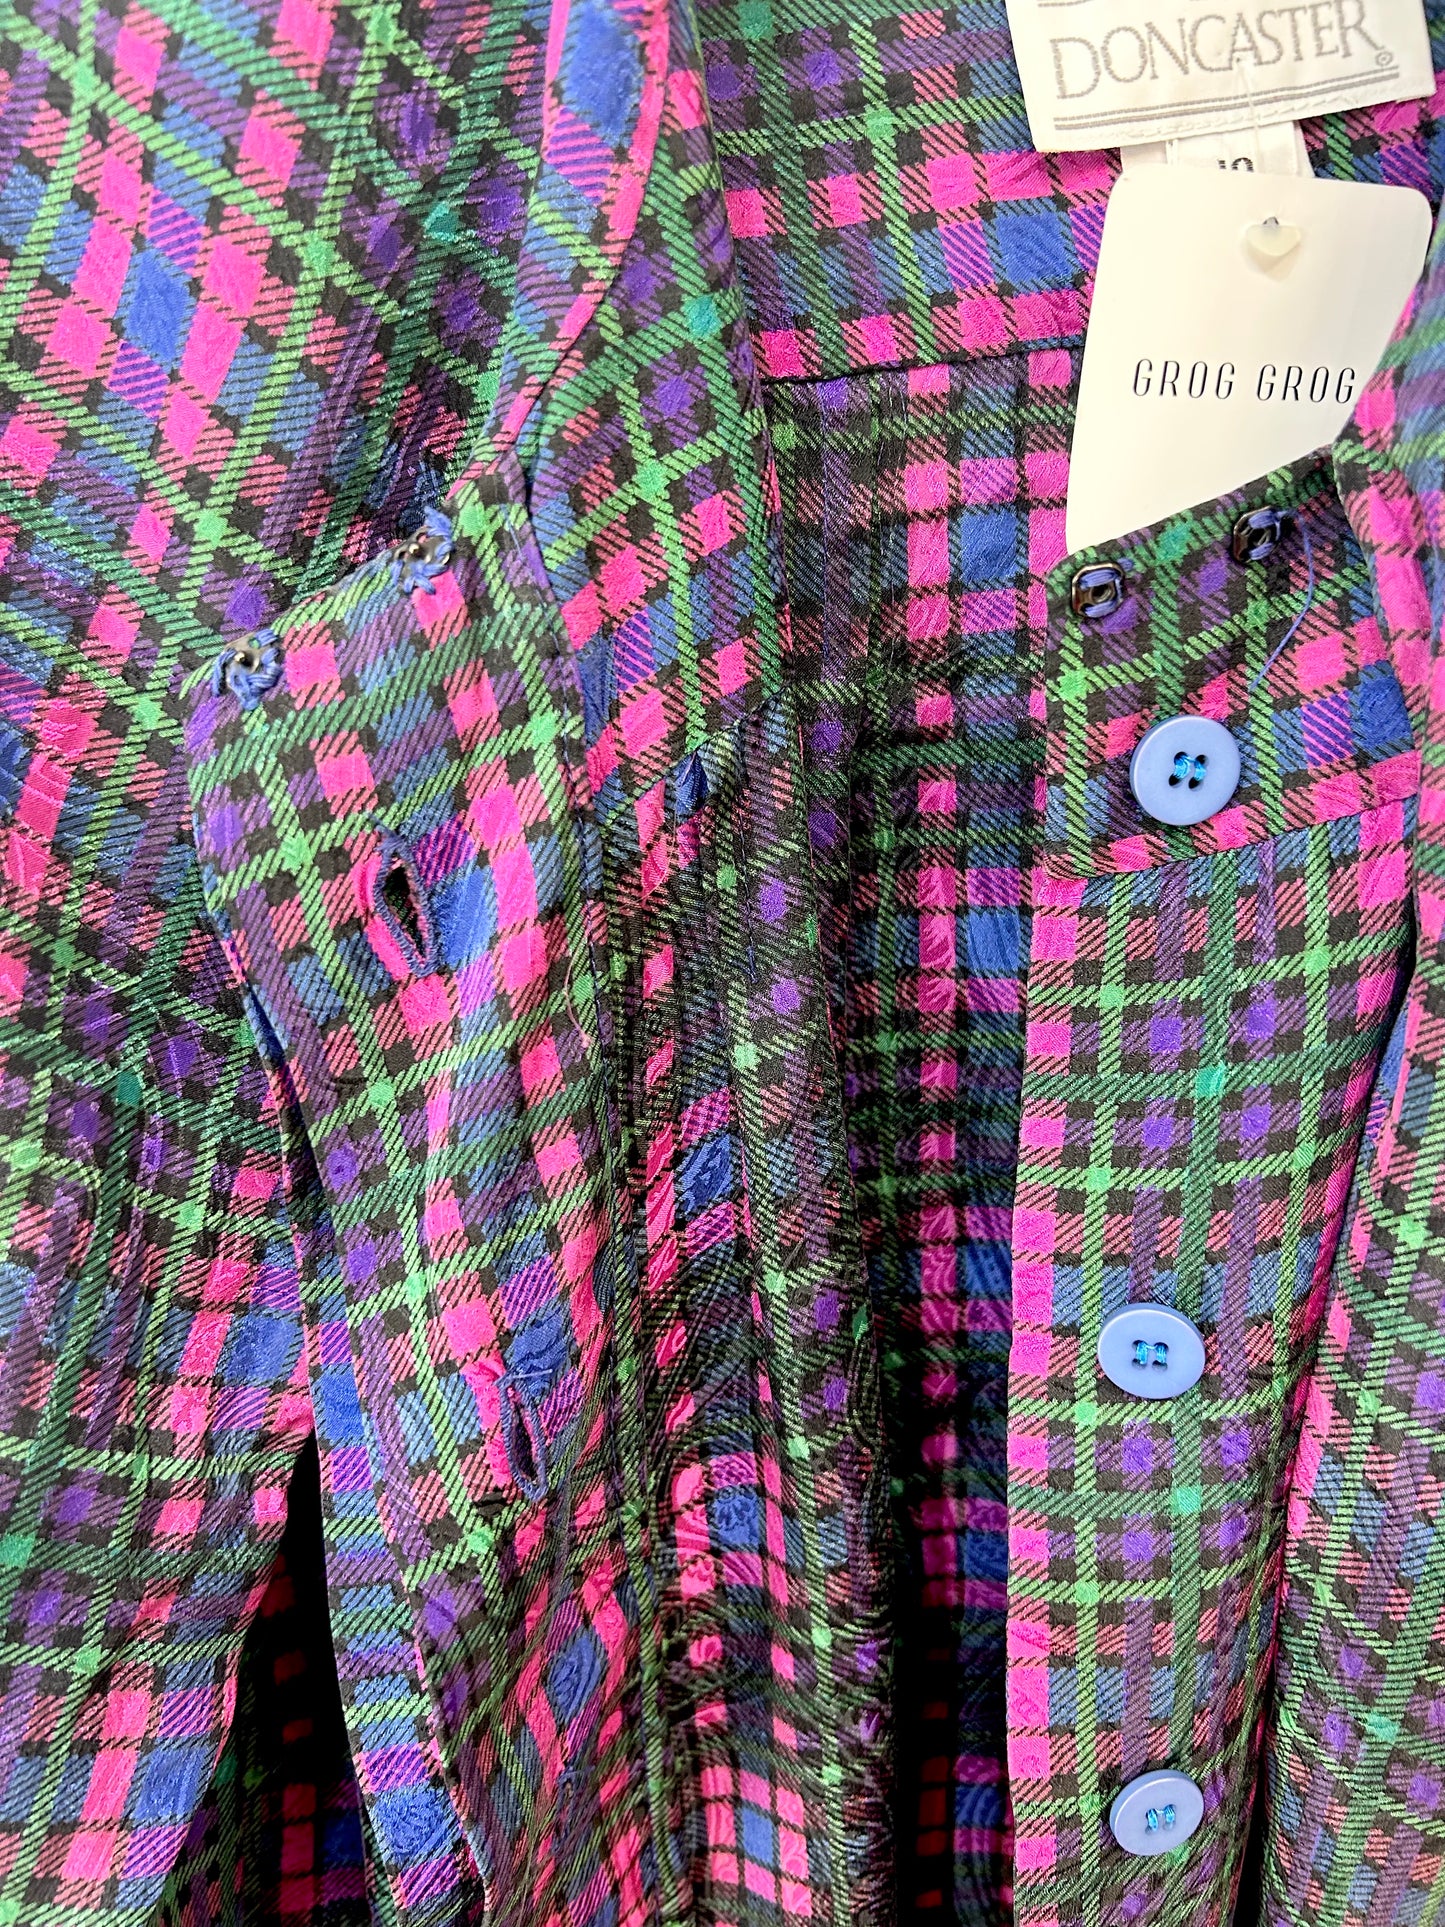 Vintage Plaid Blouse MADE IN USA [I24954]